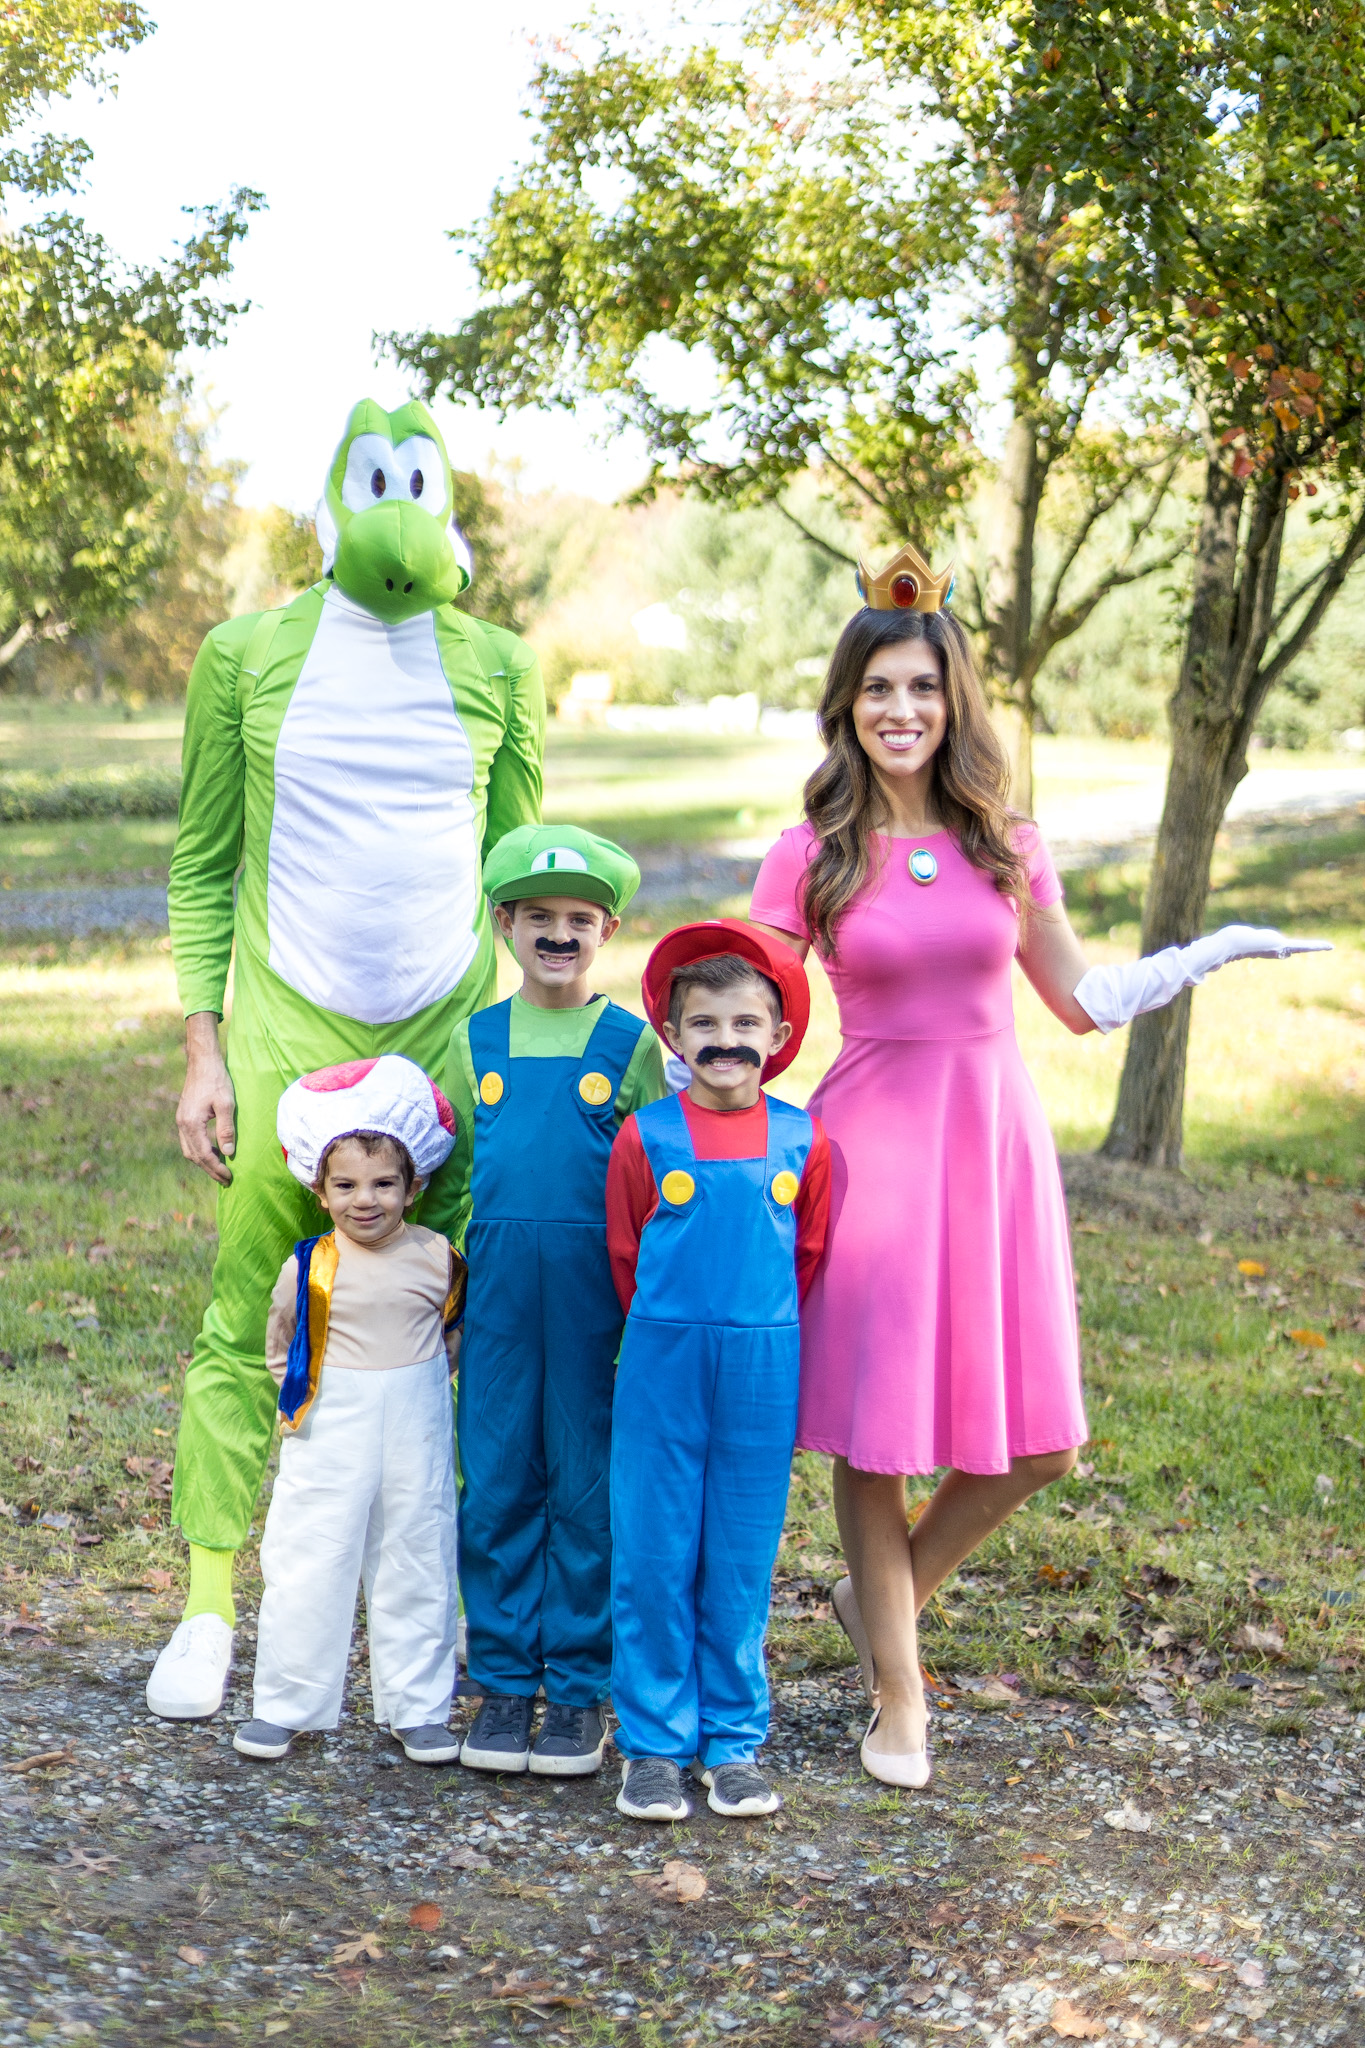 Super Mario Brothers Family Halloween Costumes - Beautifully Candid